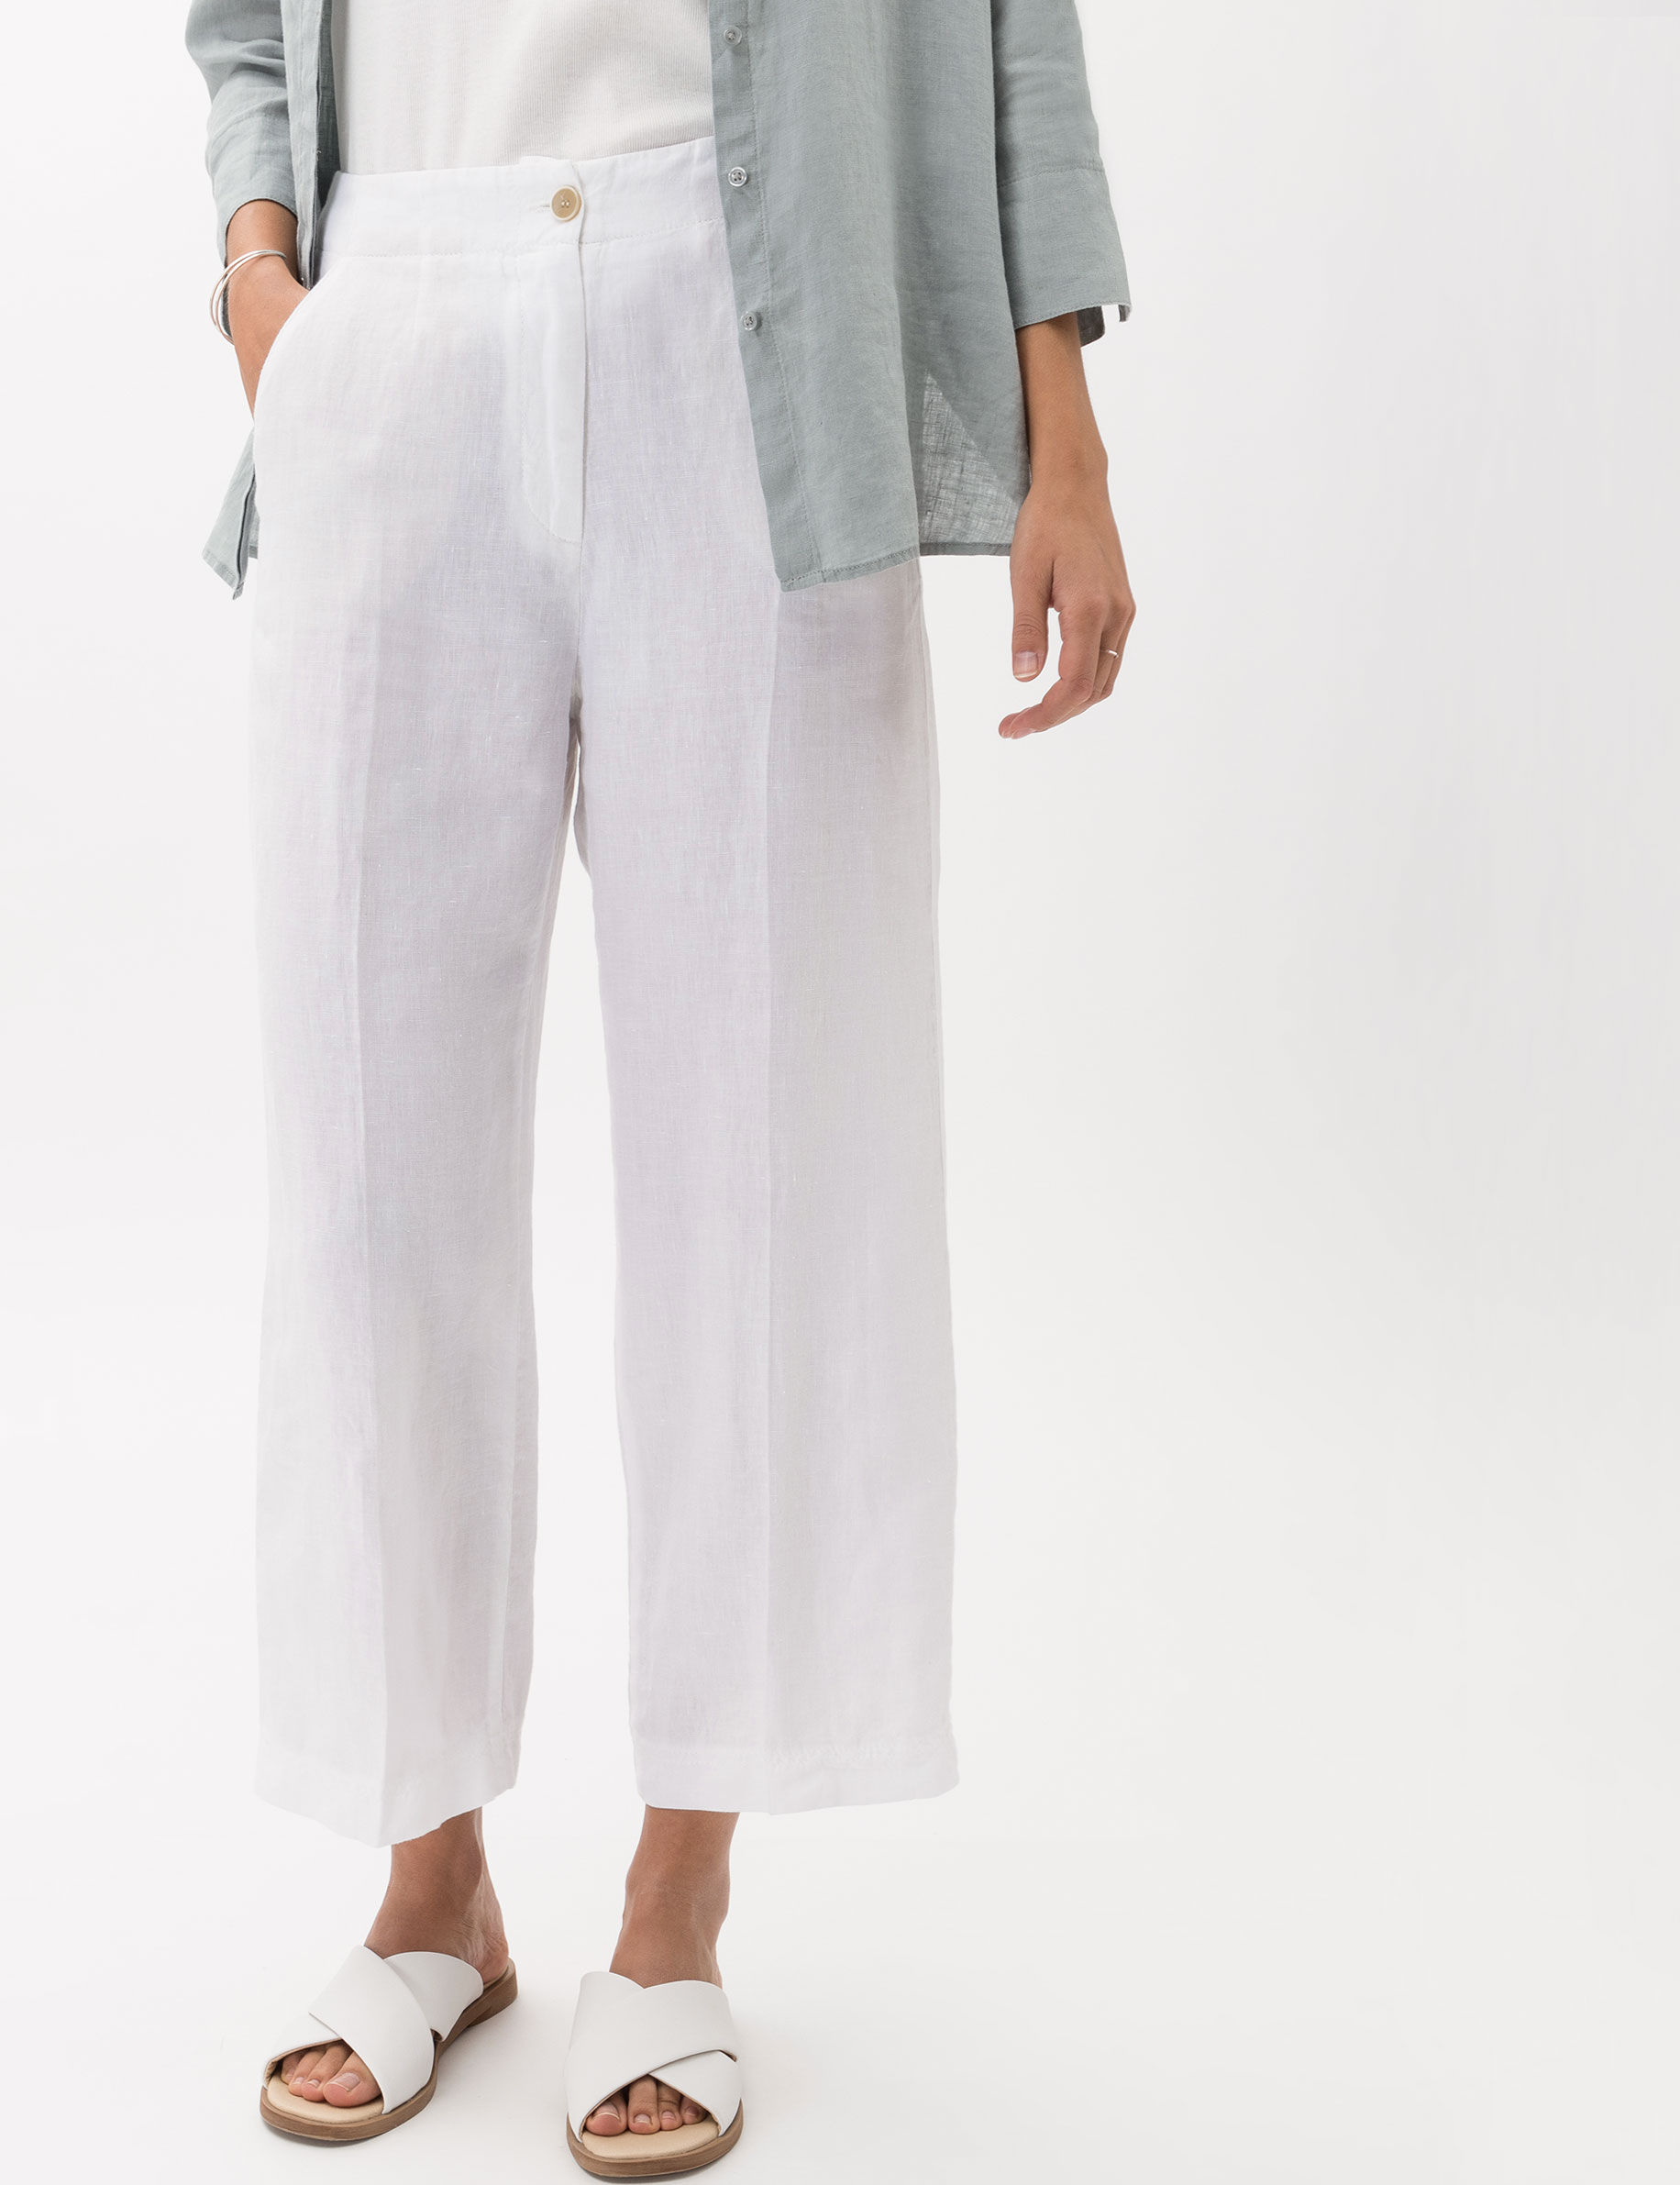 Shades of White, Women, WIDE LEG, Style MAINE S, MODEL_FRONT_ISHOP